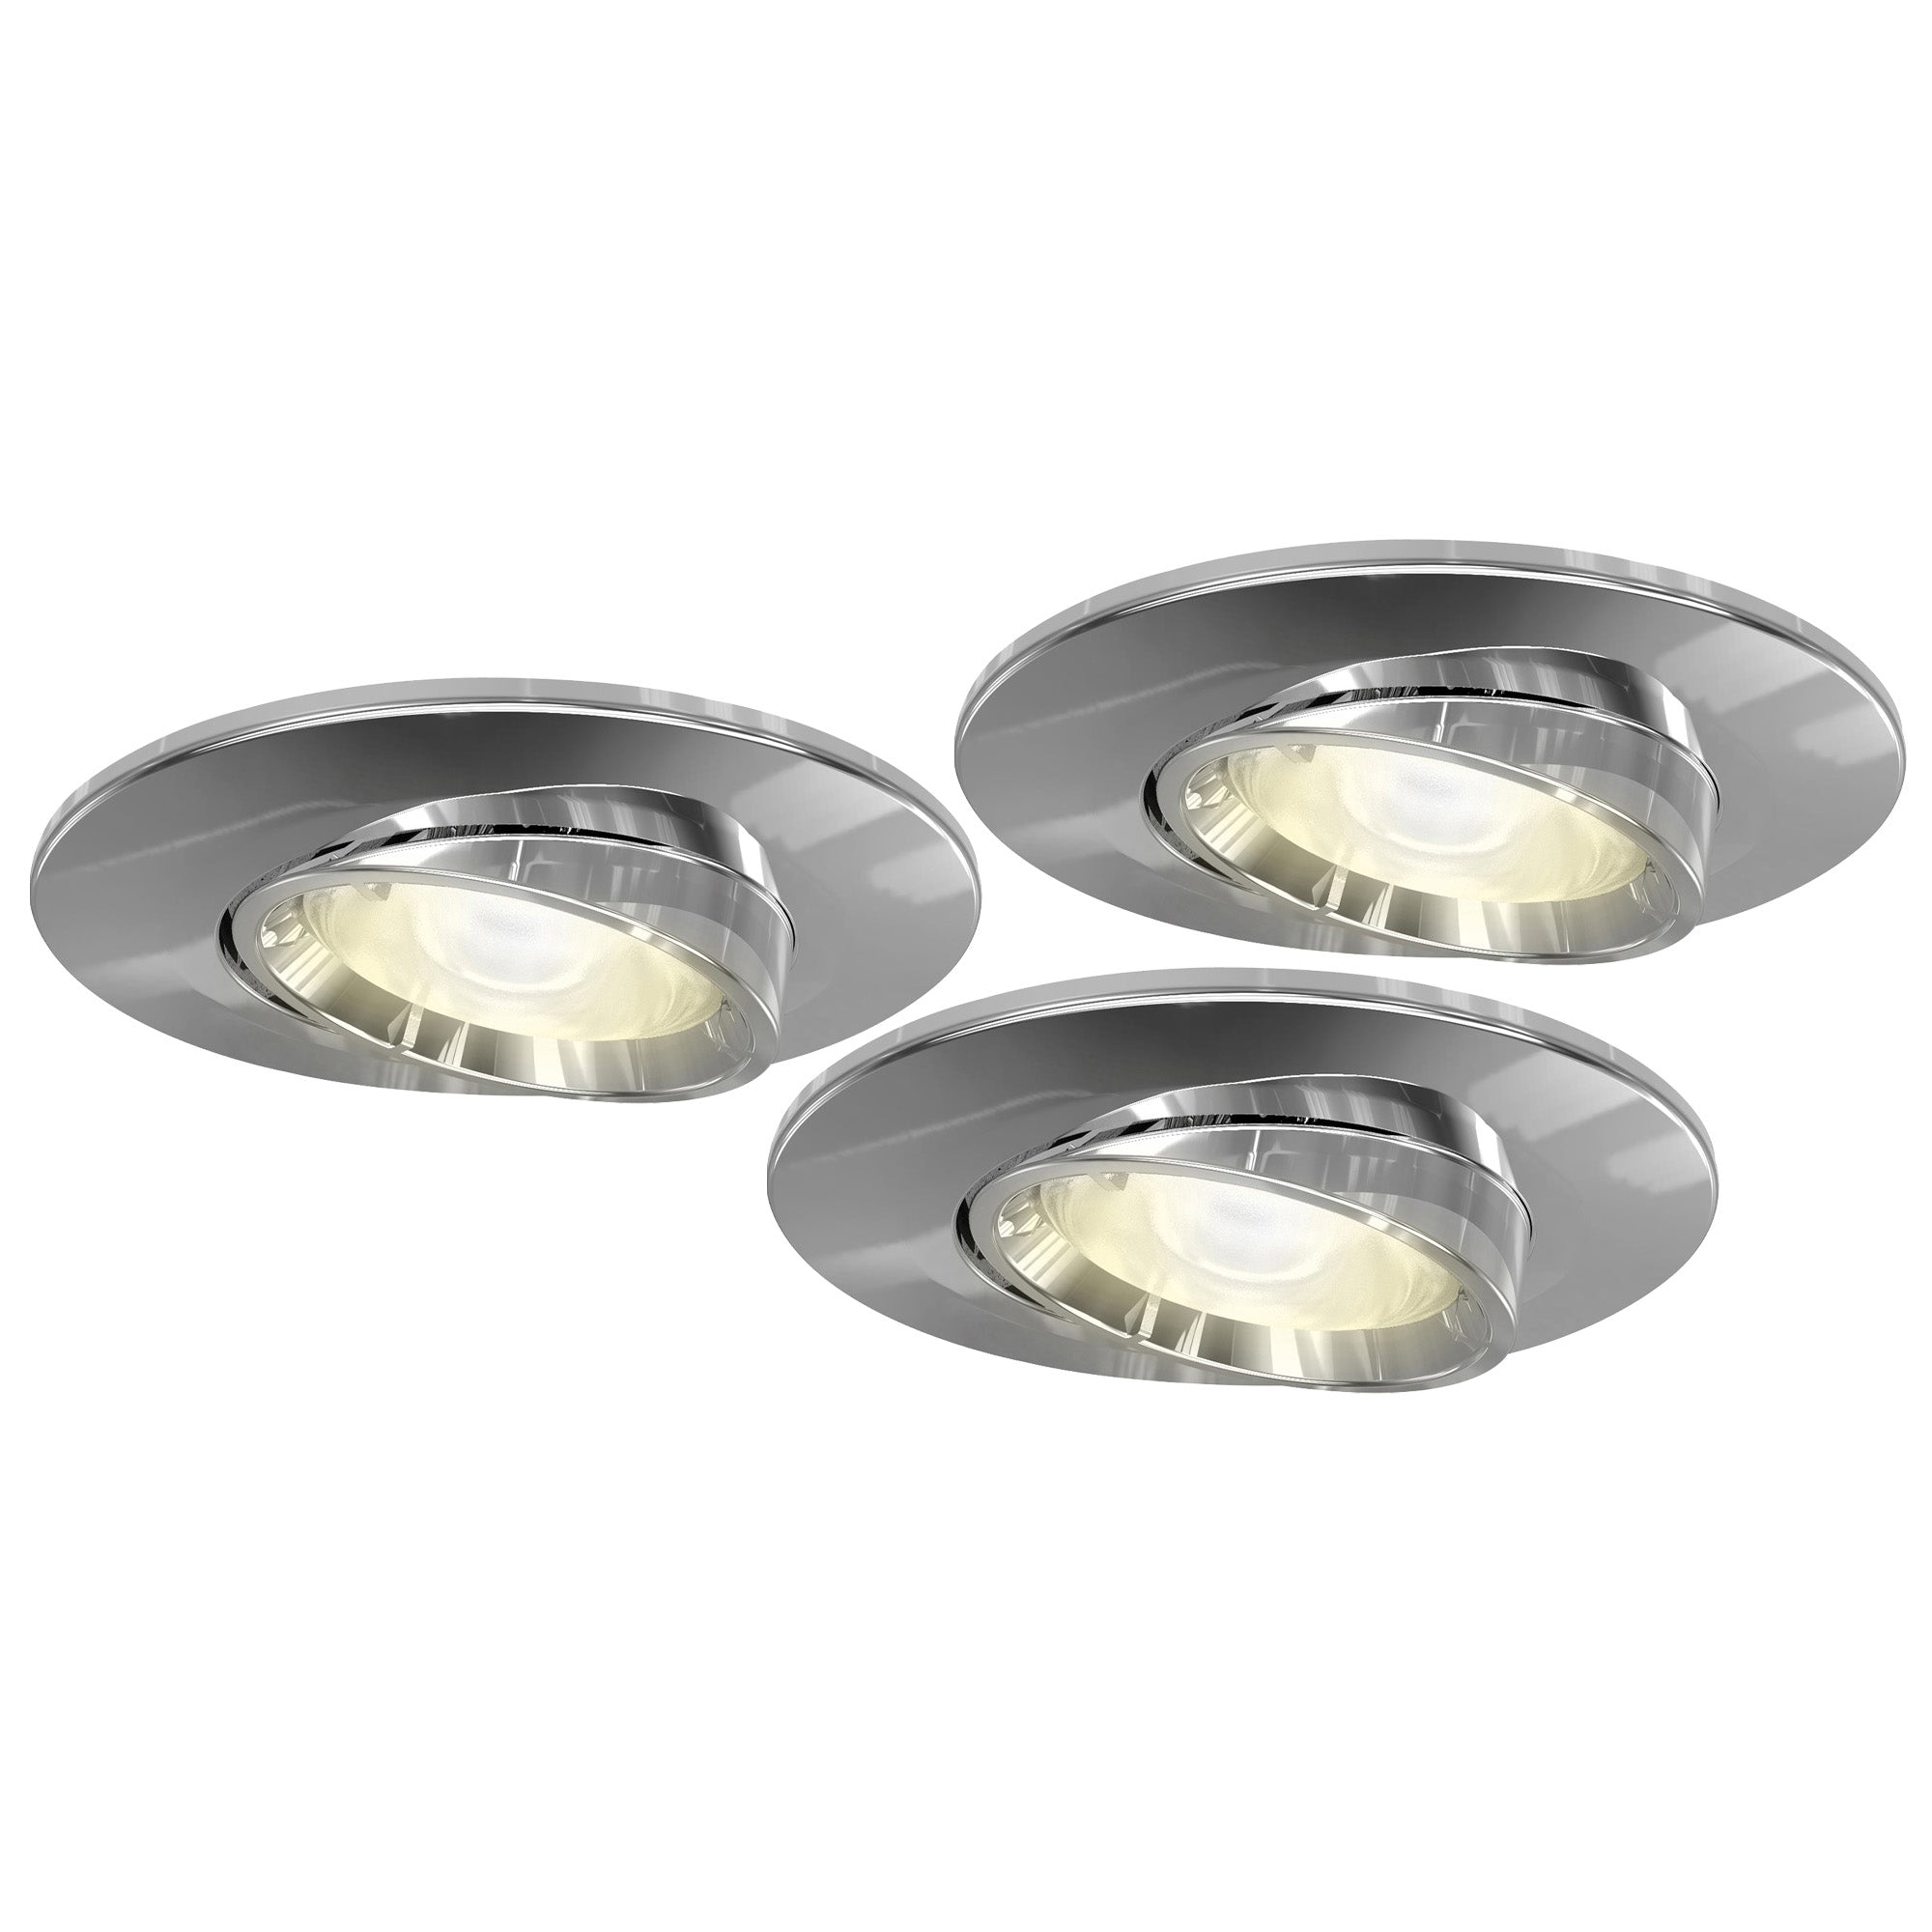 4lite WiZ Connected Fire-Rated IP20 GU10 Smart Adjustable LED Downlight - Chrome (Pack of 3)